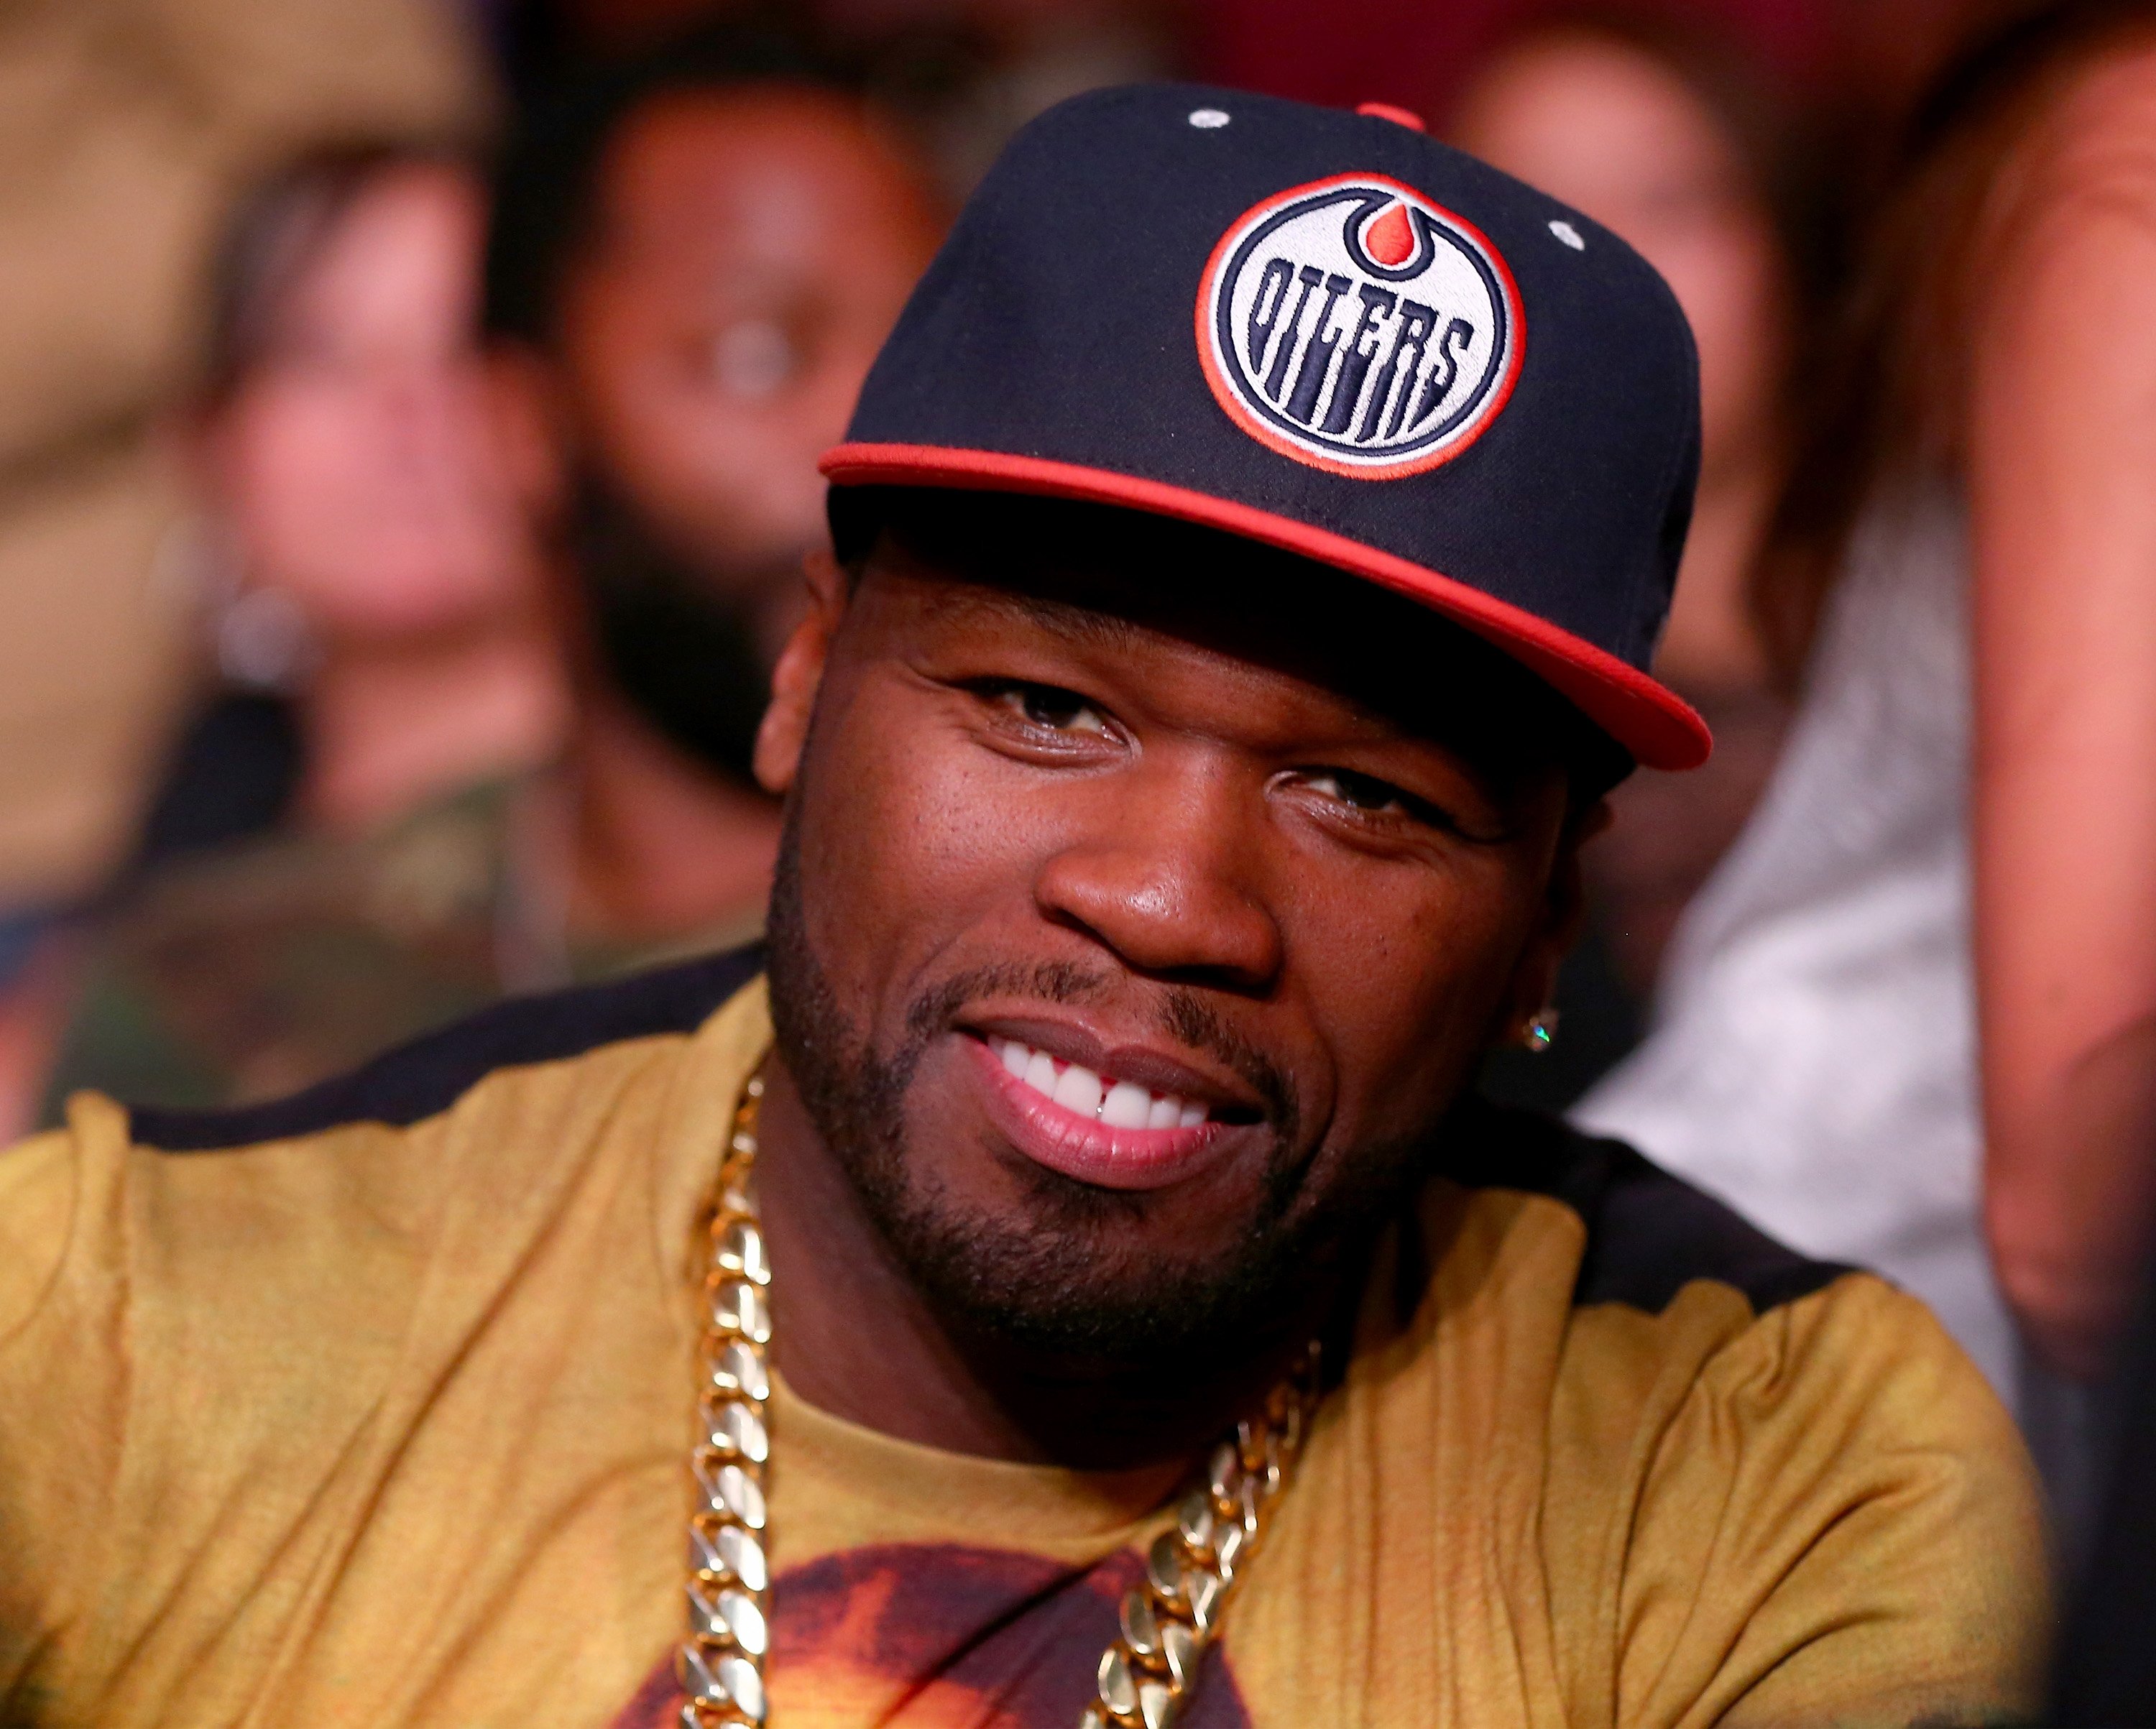 50 Cent smiling